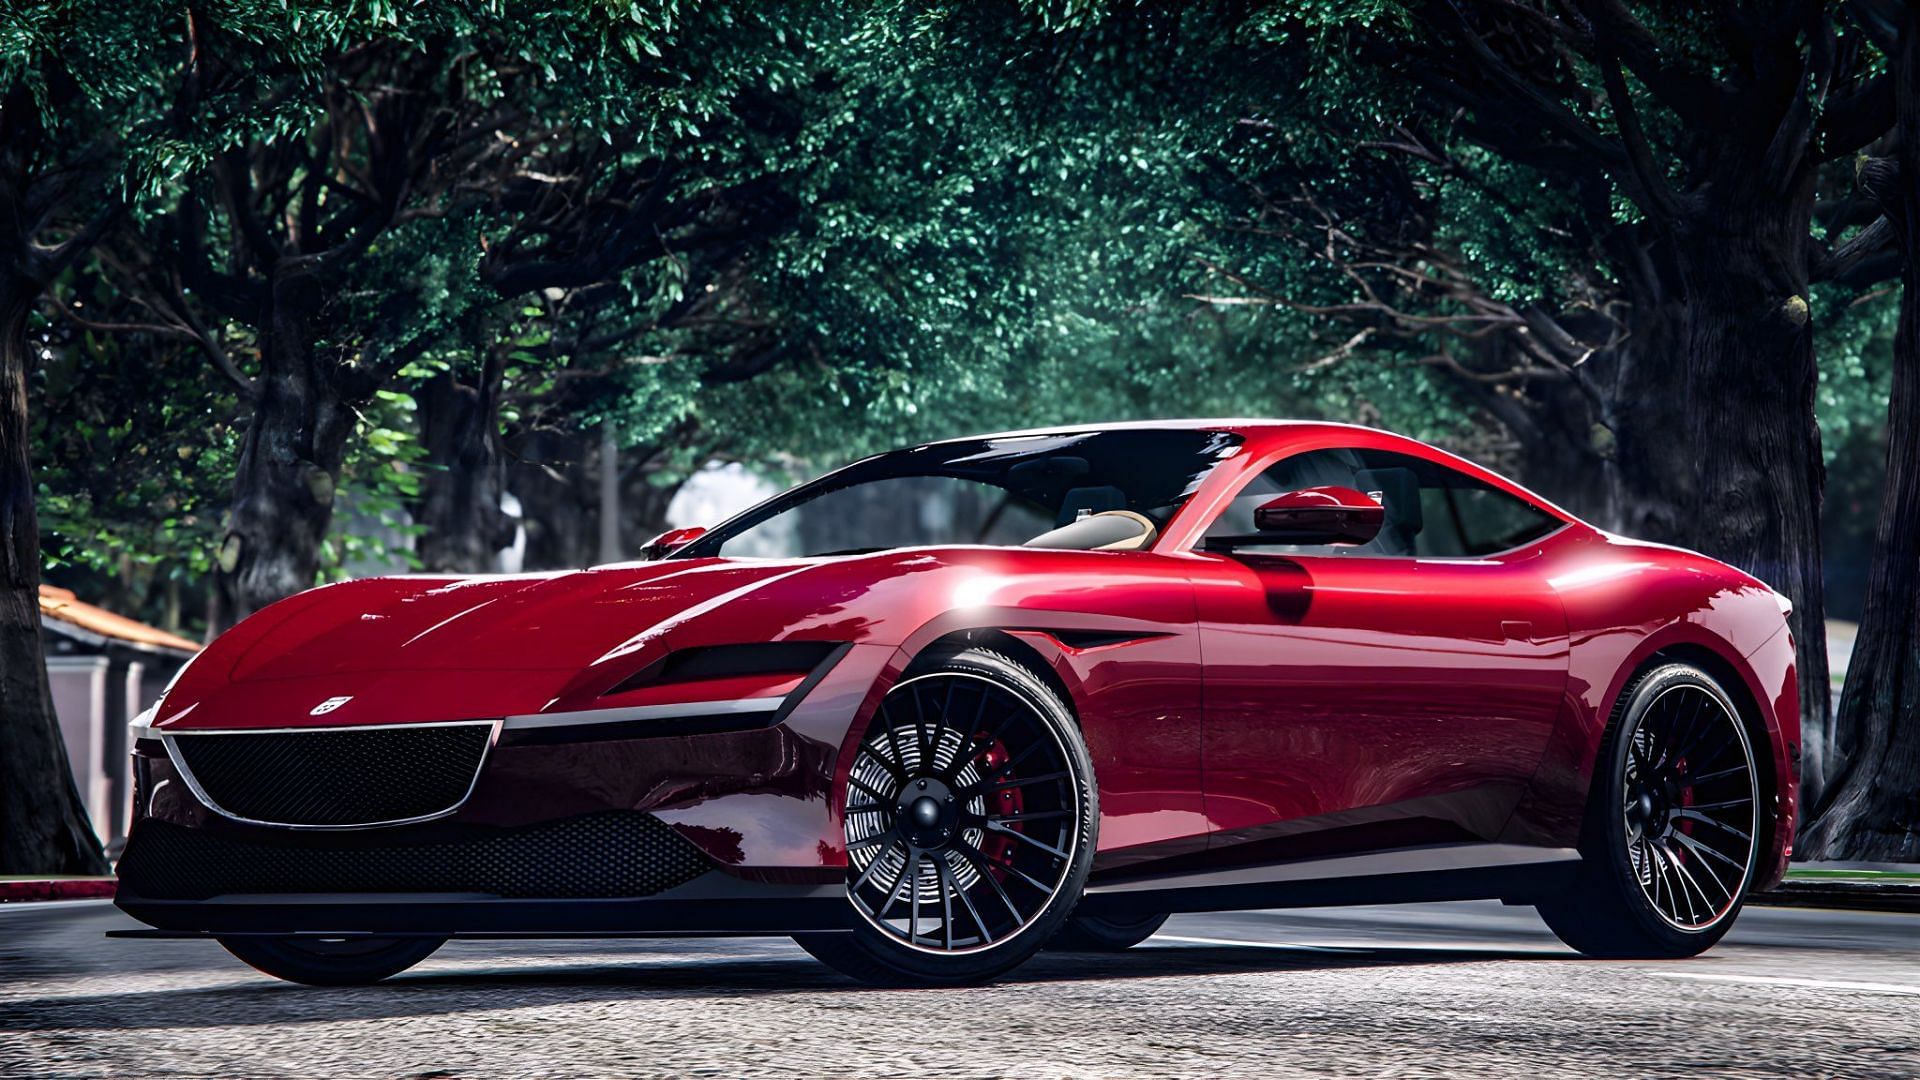 the new Itali GTO Stinger TT is one of the best cars in GTA Online (Image via Twitter/radiage_)